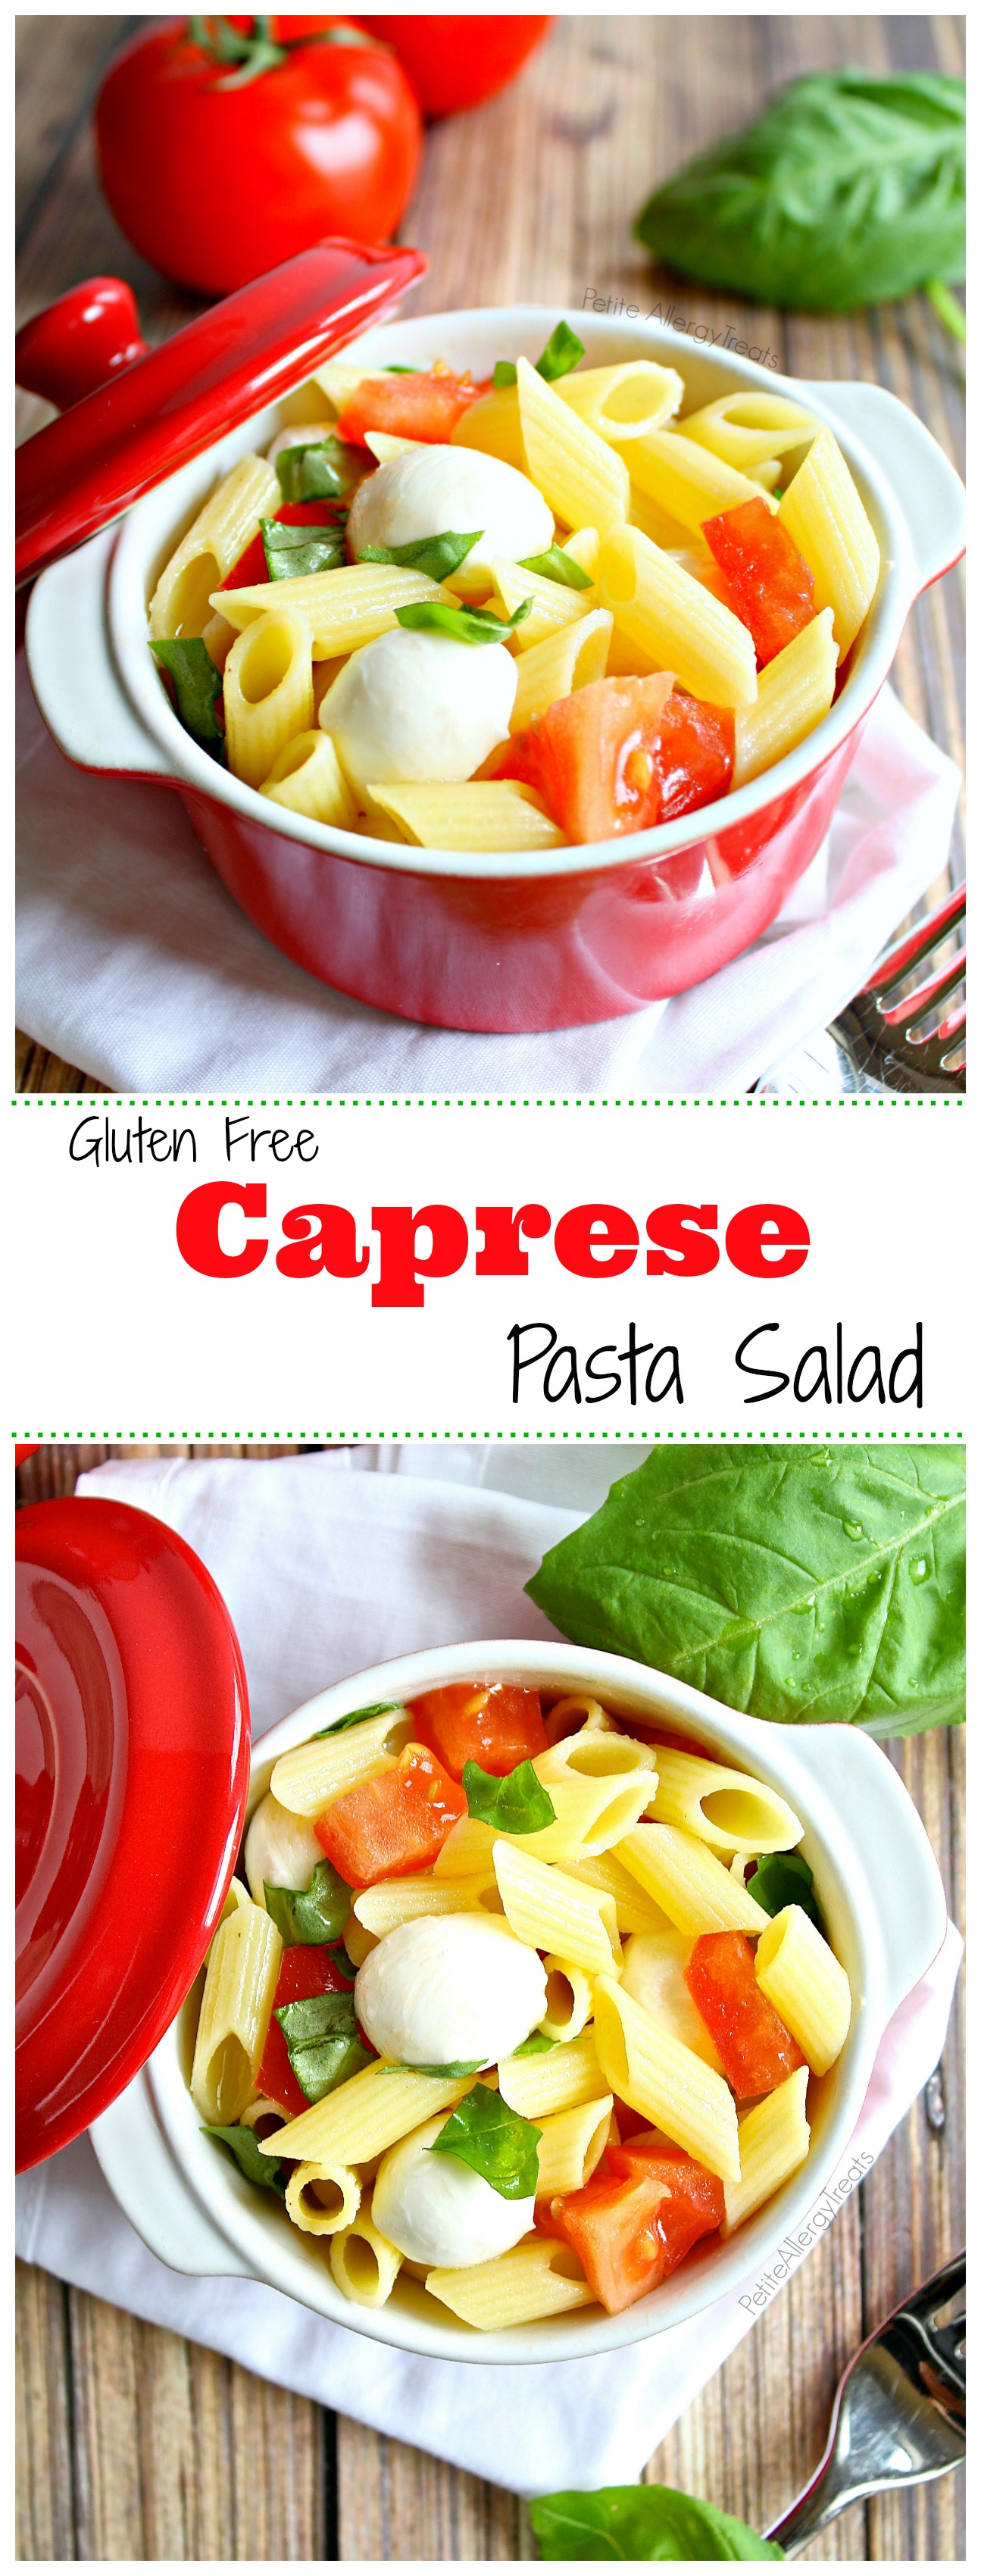 Caprese Pasta Salad (gluten free) A classic Italian salad made with pasta for an easy picnic fave.